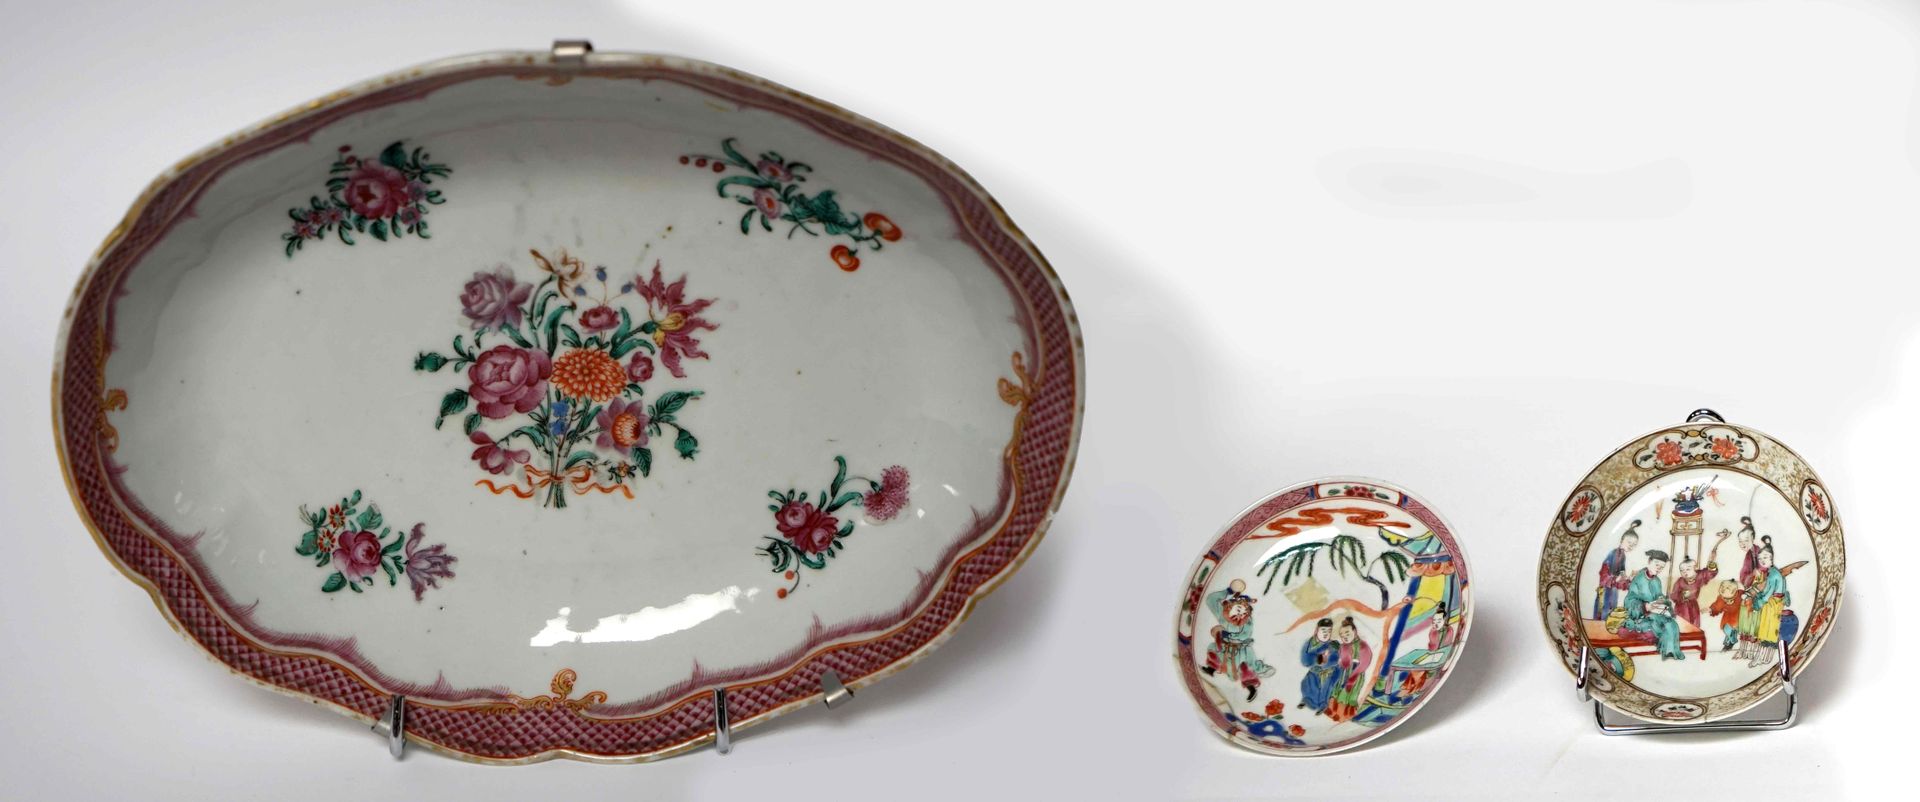 Null CHINA, 18th century. BANNETTE in porcelain of the Company of India, with po&hellip;